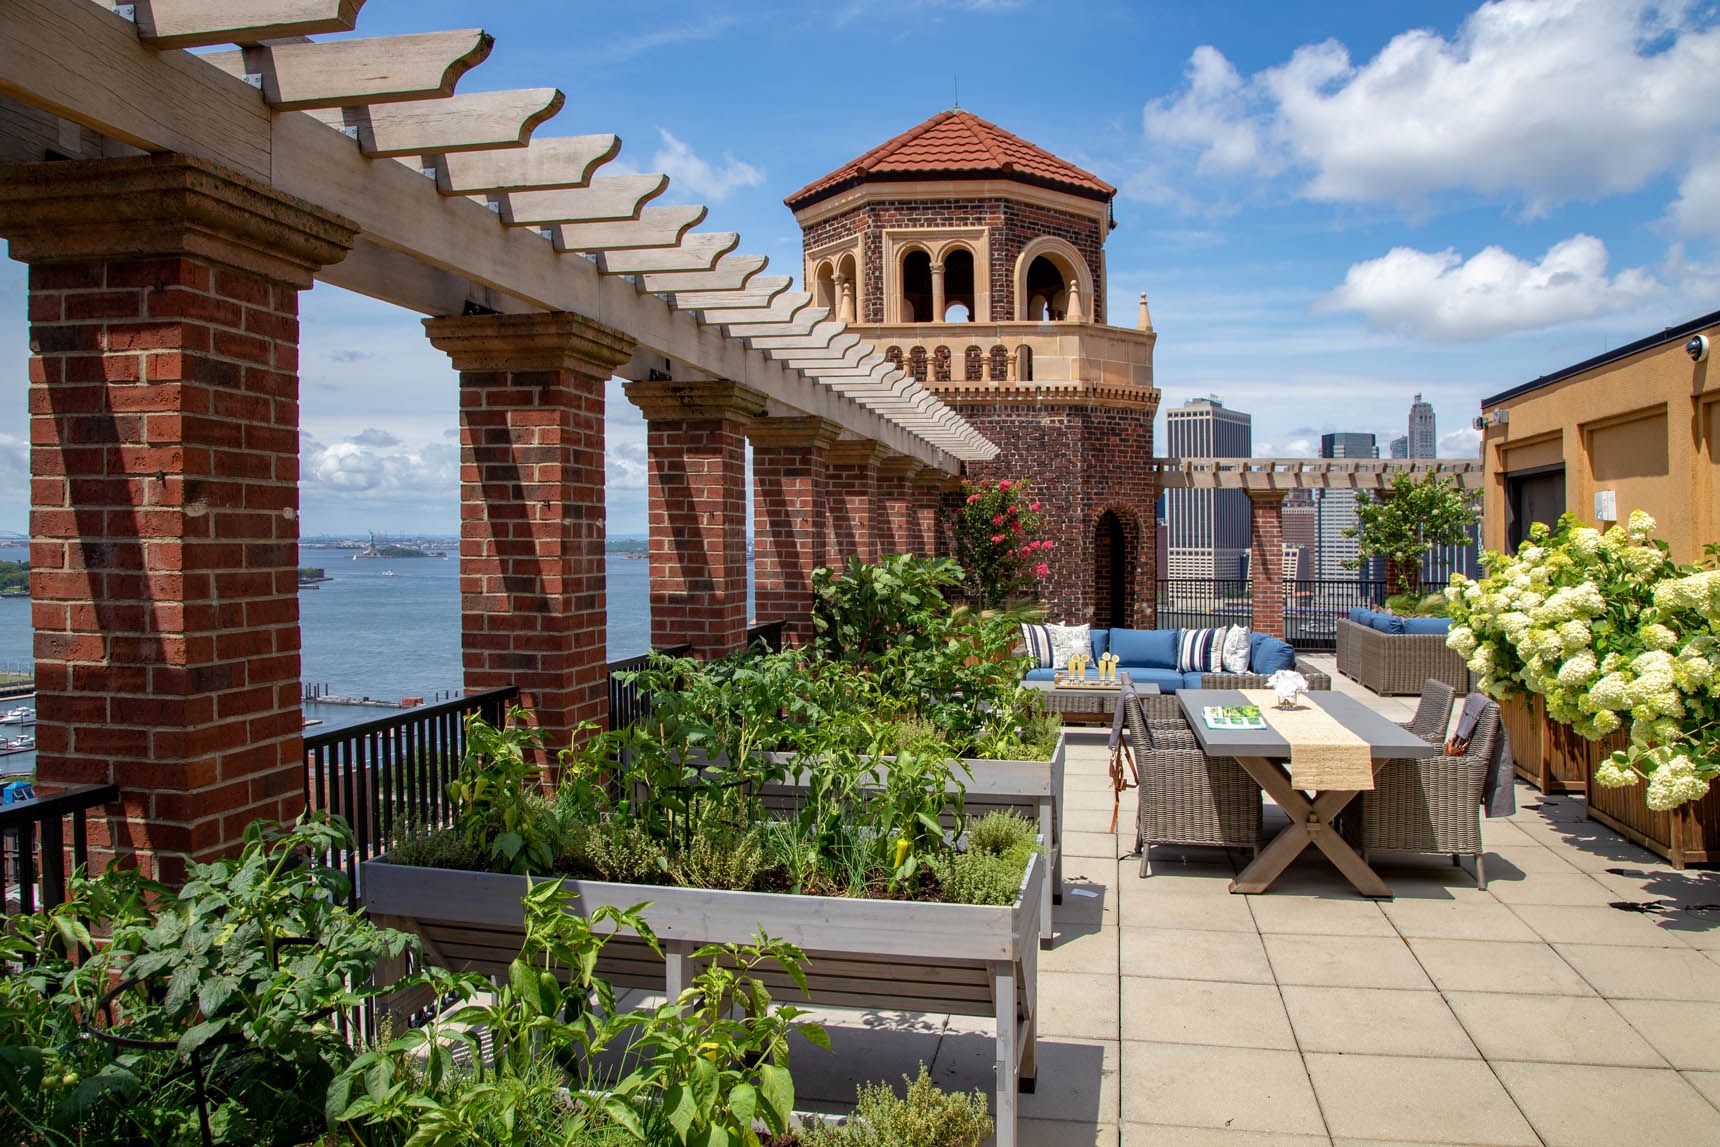 Senior living community, The Watermark at Brooklyn Heights, featuring terrace architecture and garden.